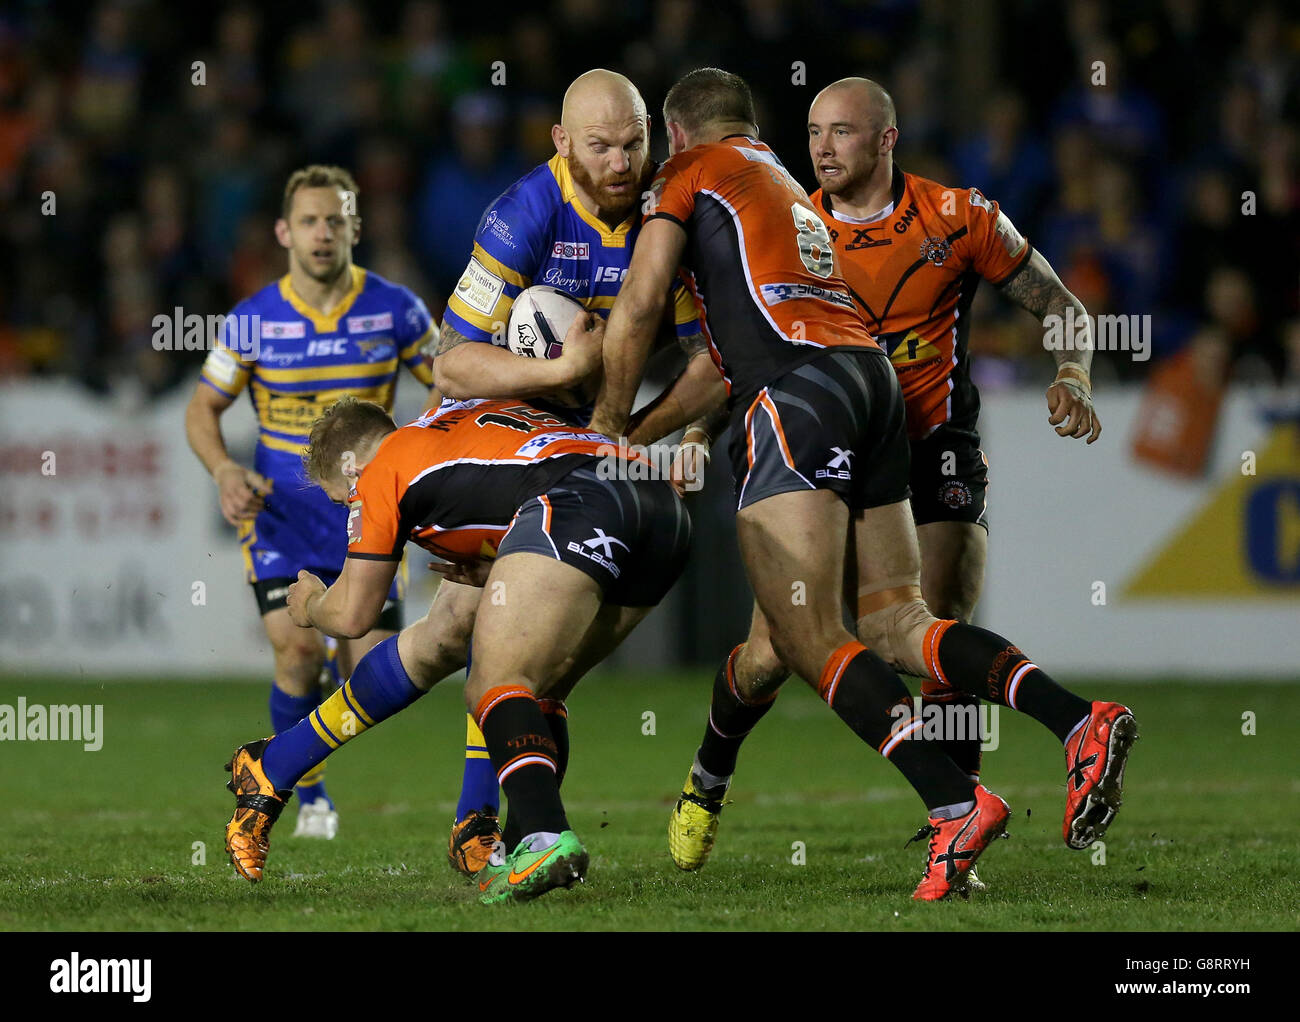 Leeds Rhinos Keith Galloway is tackled by Castleford Tigers Paul McShane (left) and Andy Lynch (right), during the First Utility Super League match at the Mend-A-Hose Jungle, Castleford Stock Photo